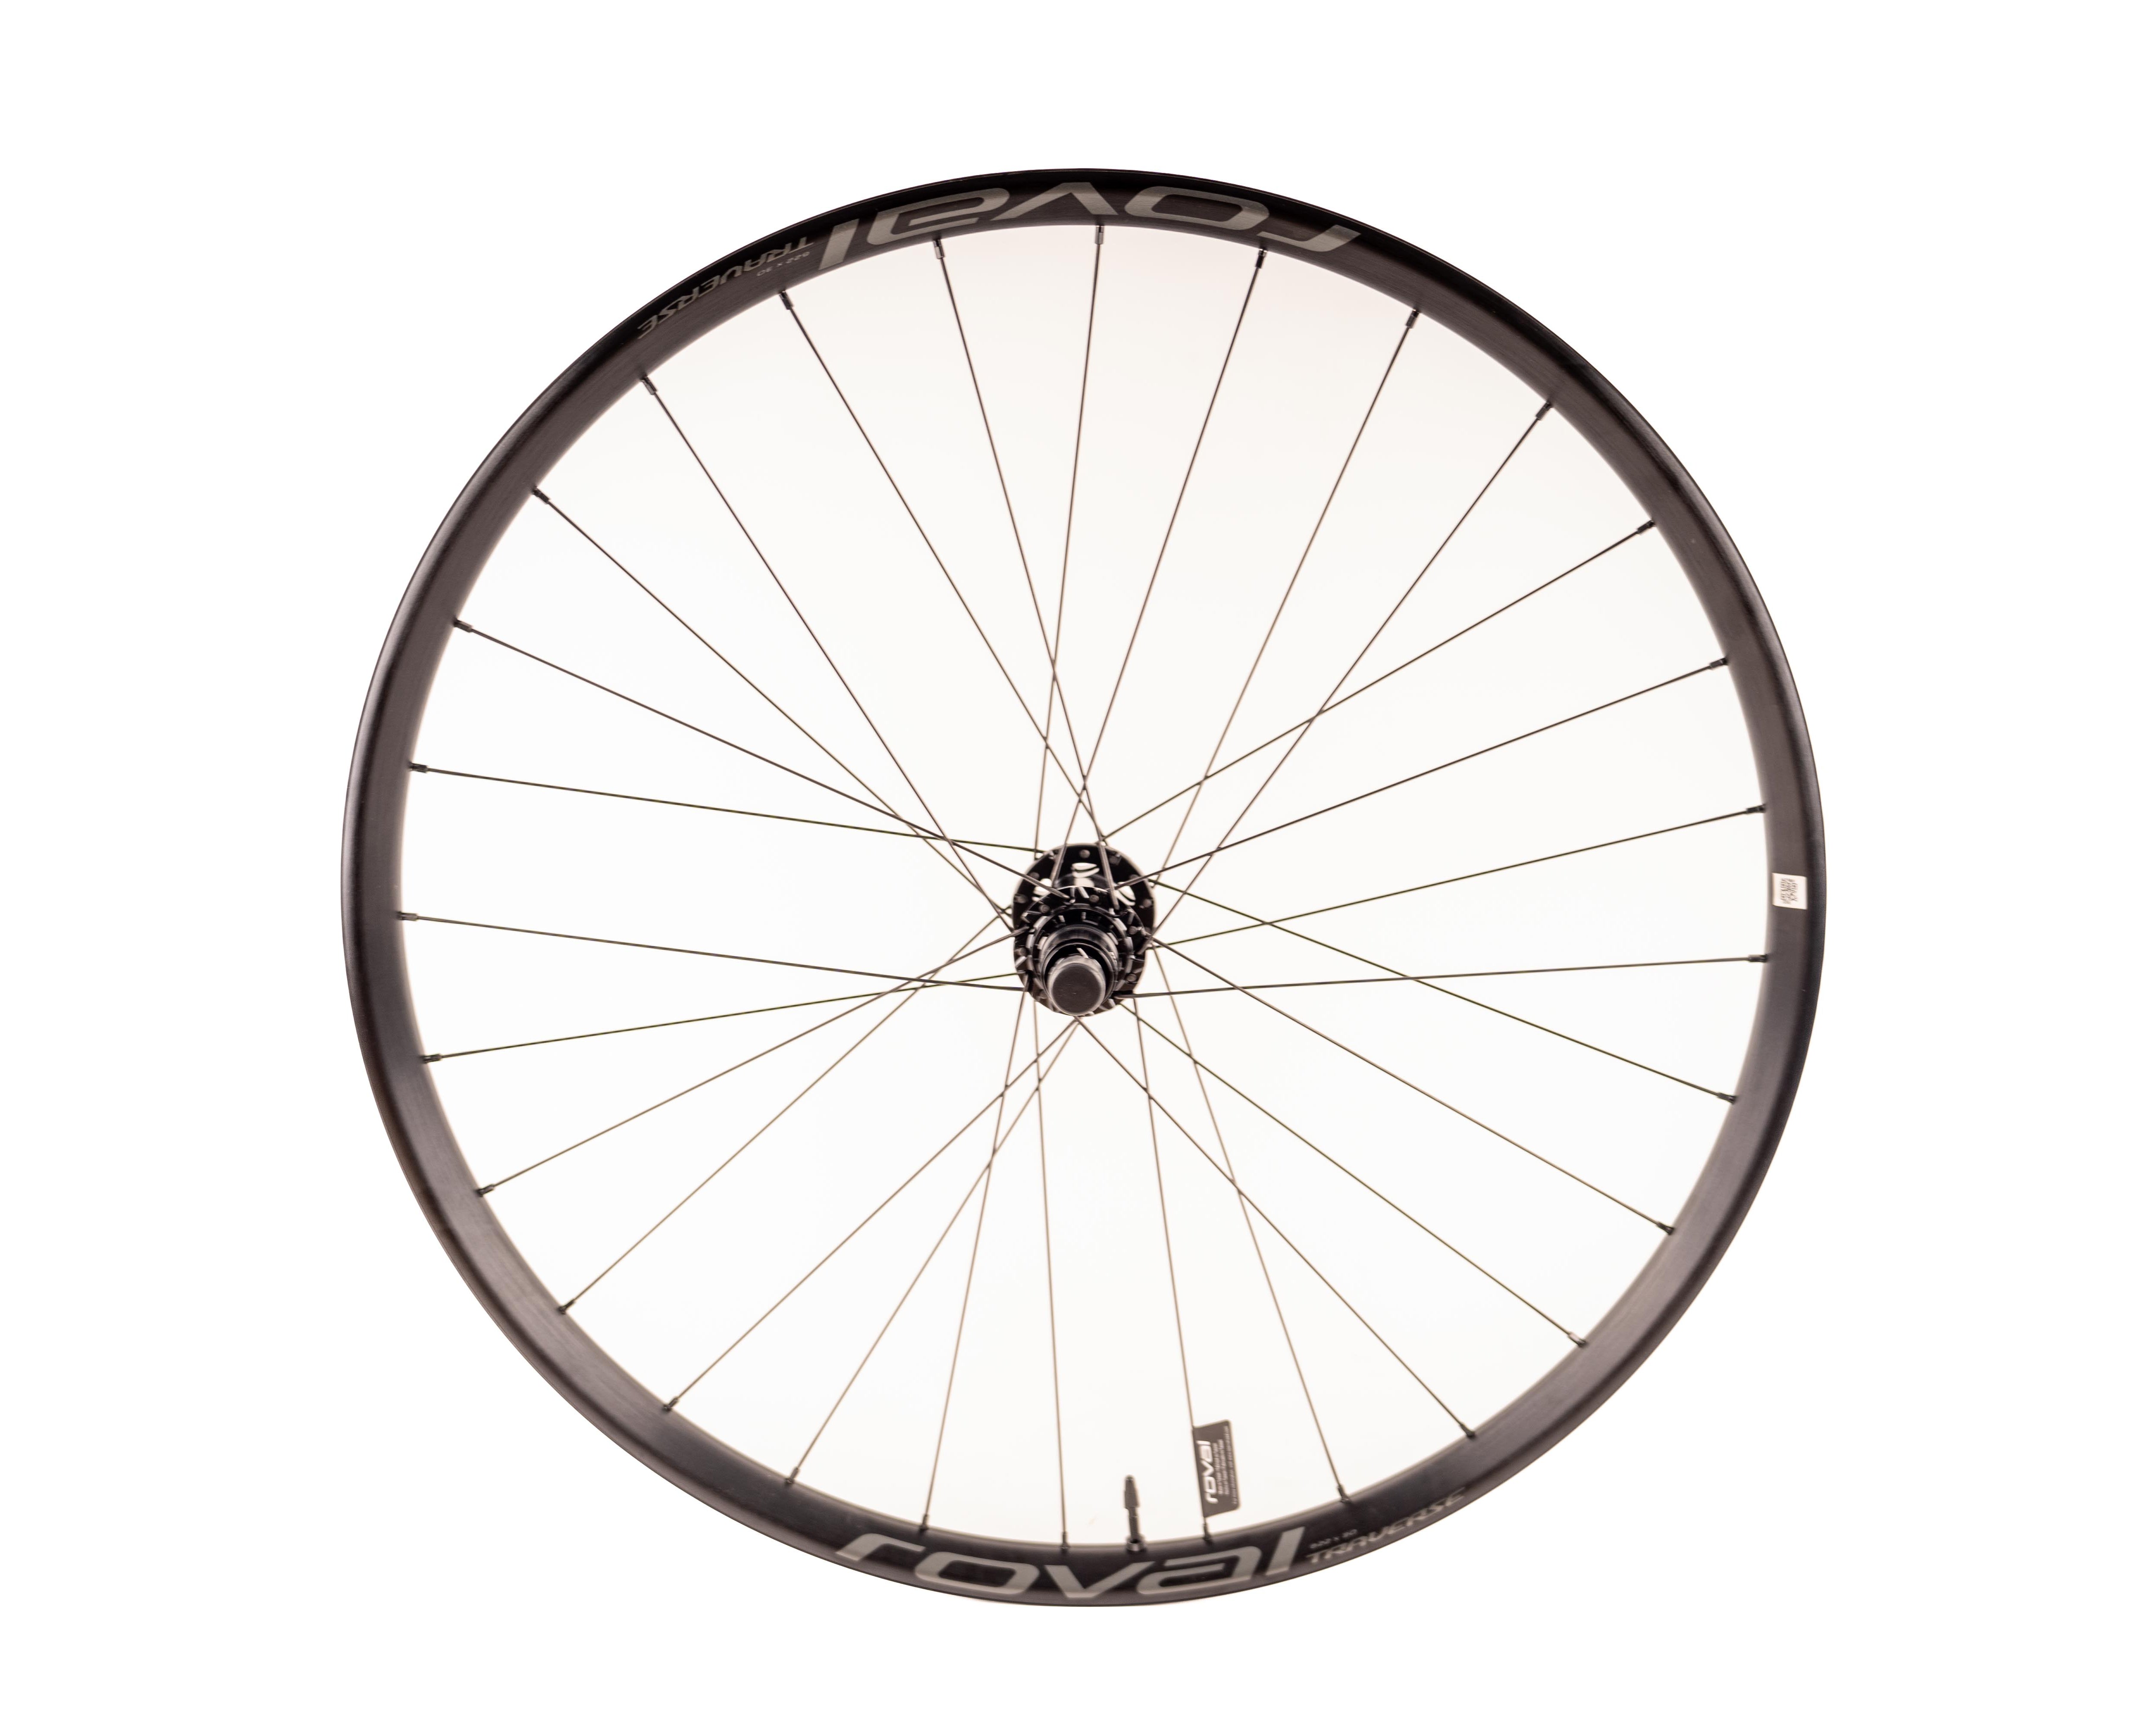 Roval Traverse 29 6B XD Rear Wheel Blk/Char – Incycle Bicycles